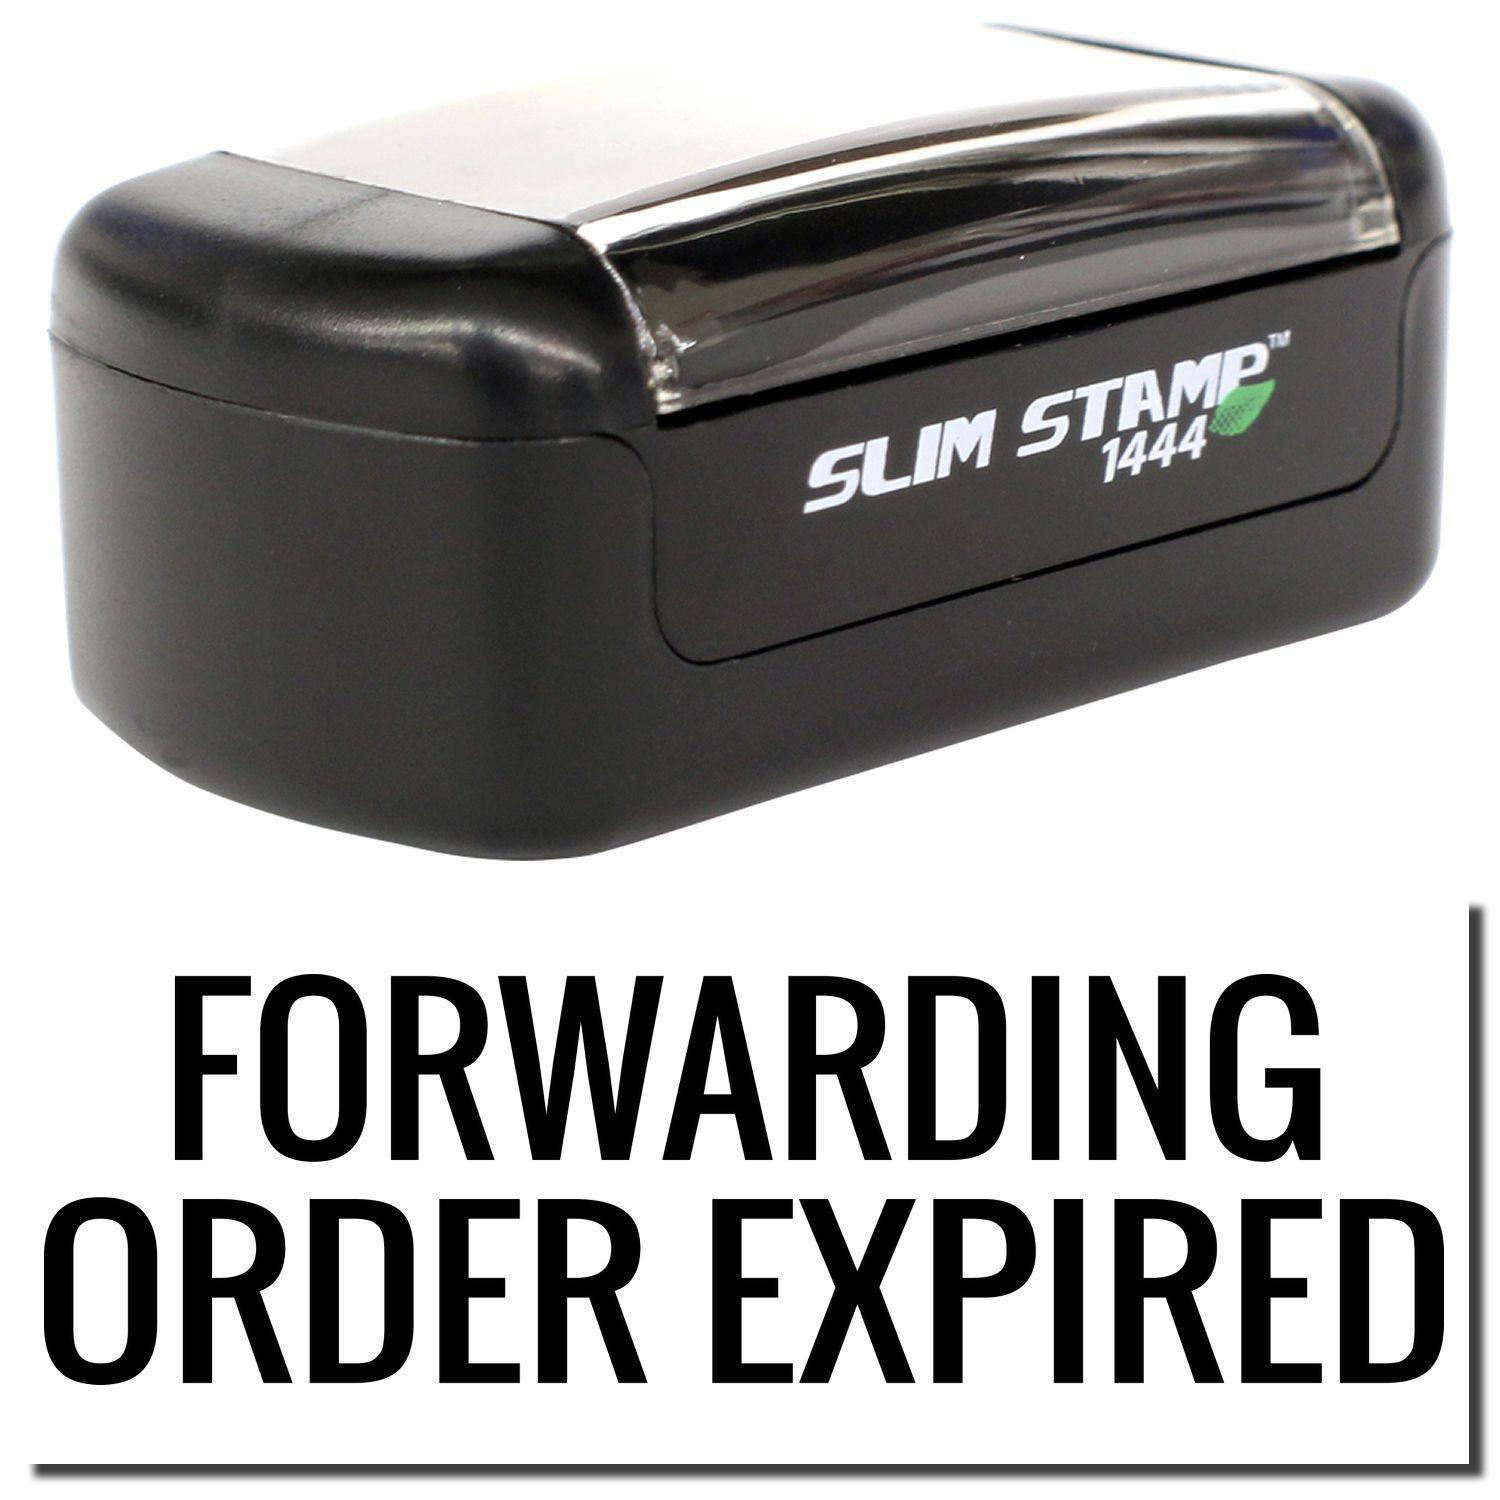 A stock office pre-inked stamp with a stamped image showing how the text "FORWARDING ORDER EXPIRED" is displayed after stamping.